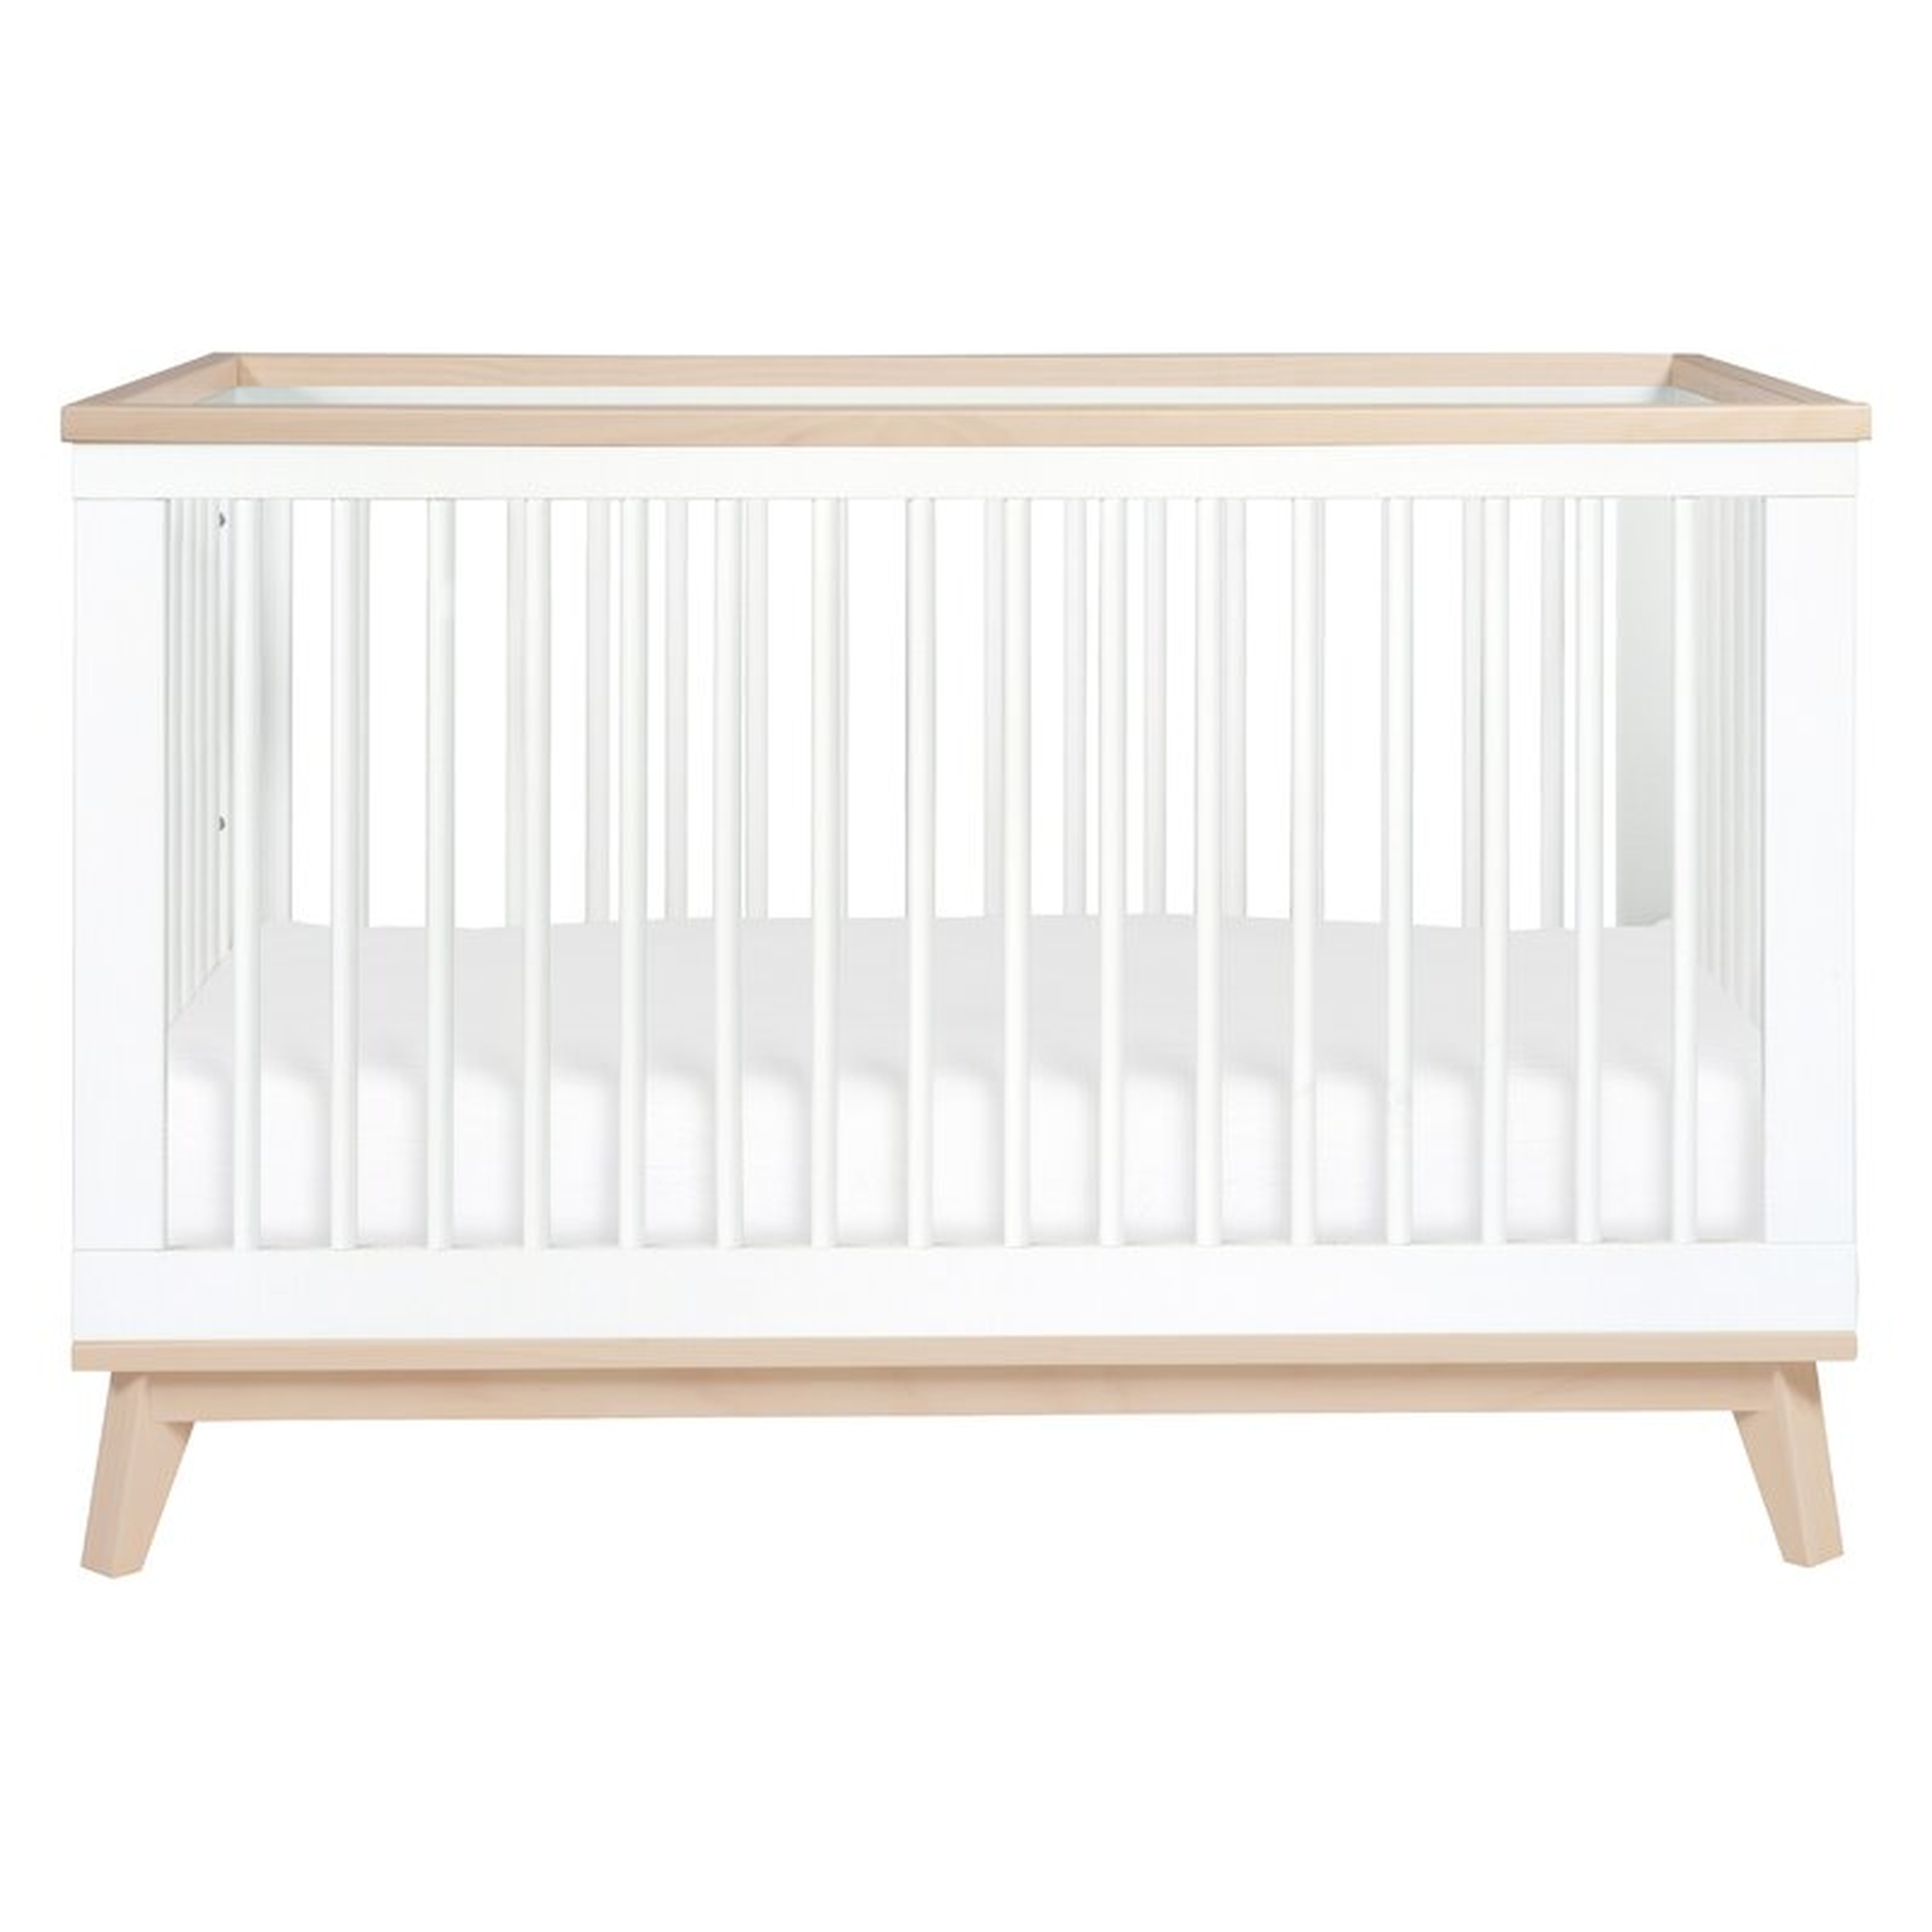 Scoot 3-in-1 Convertible Crib Color: White/Washed Natural - Perigold